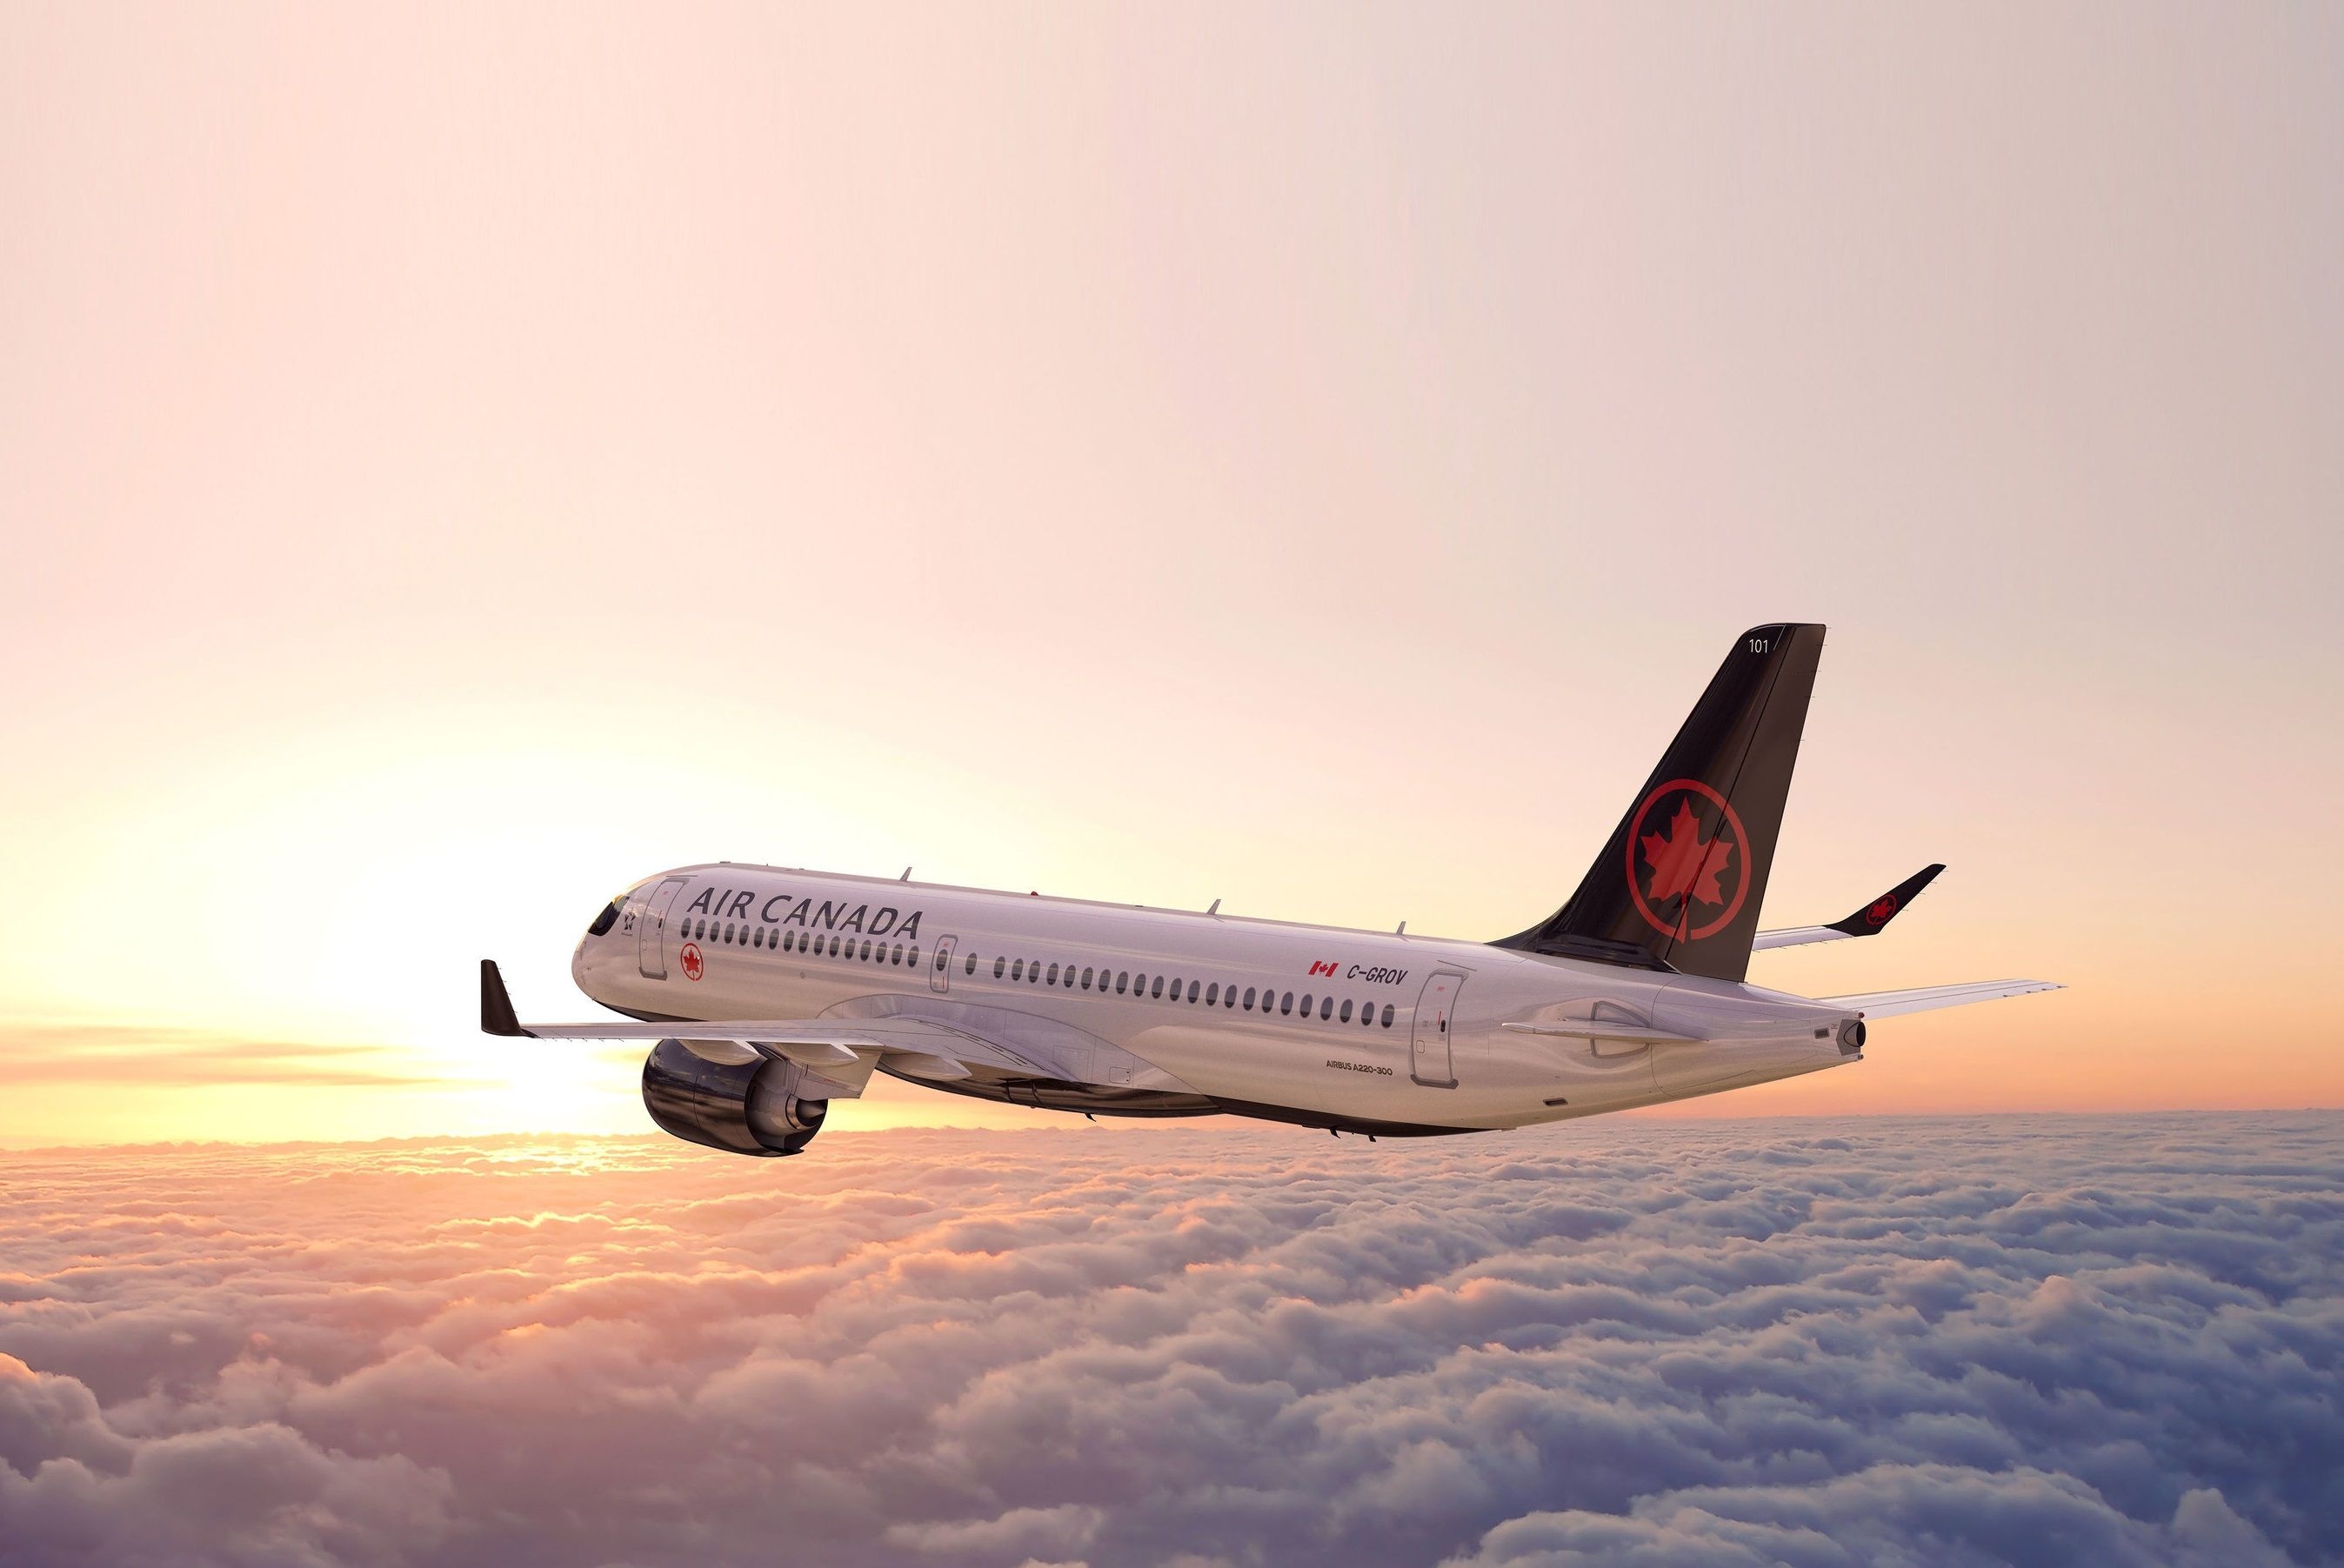 Airbus A220, Air Canada wallpapers, Airline backgrounds, Favourite destinations, 2700x1810 HD Desktop